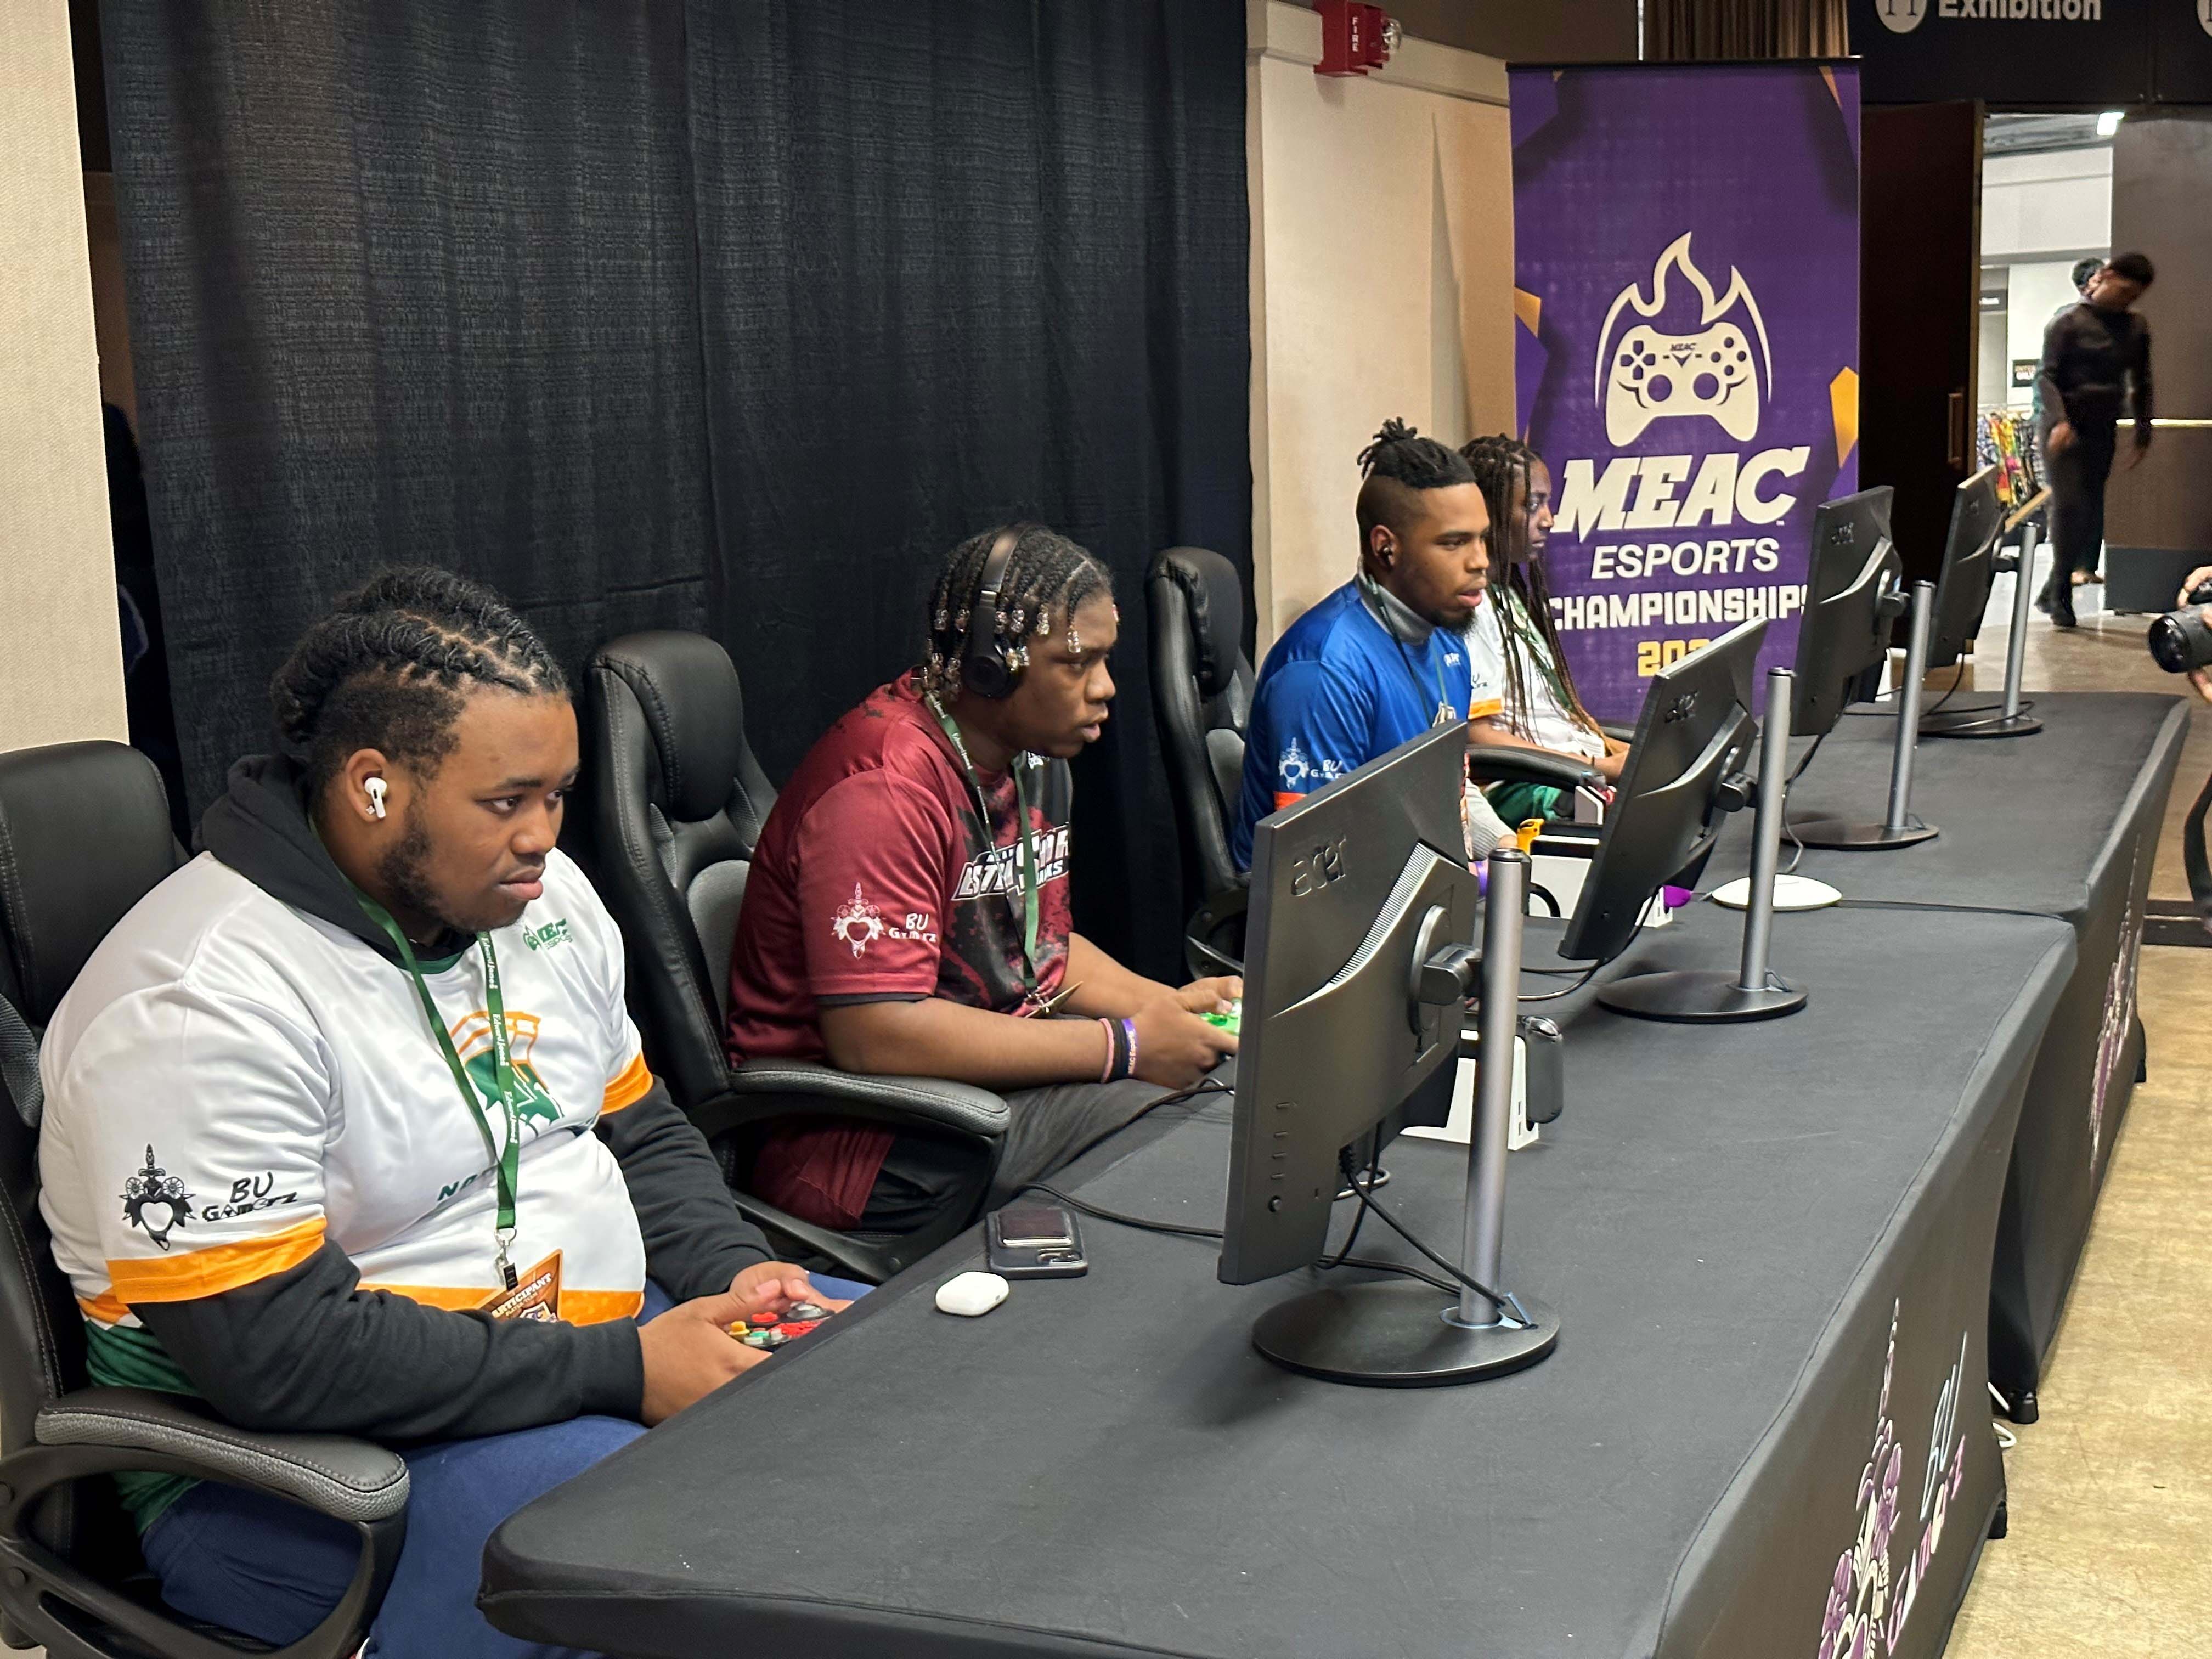 Byram Smithen (far left) and Jalon Nicholson (center-left) compete in the MEAC Super Smash Bros. Tournament at Norfolk Scope Arena. (Image: Connor Worley)